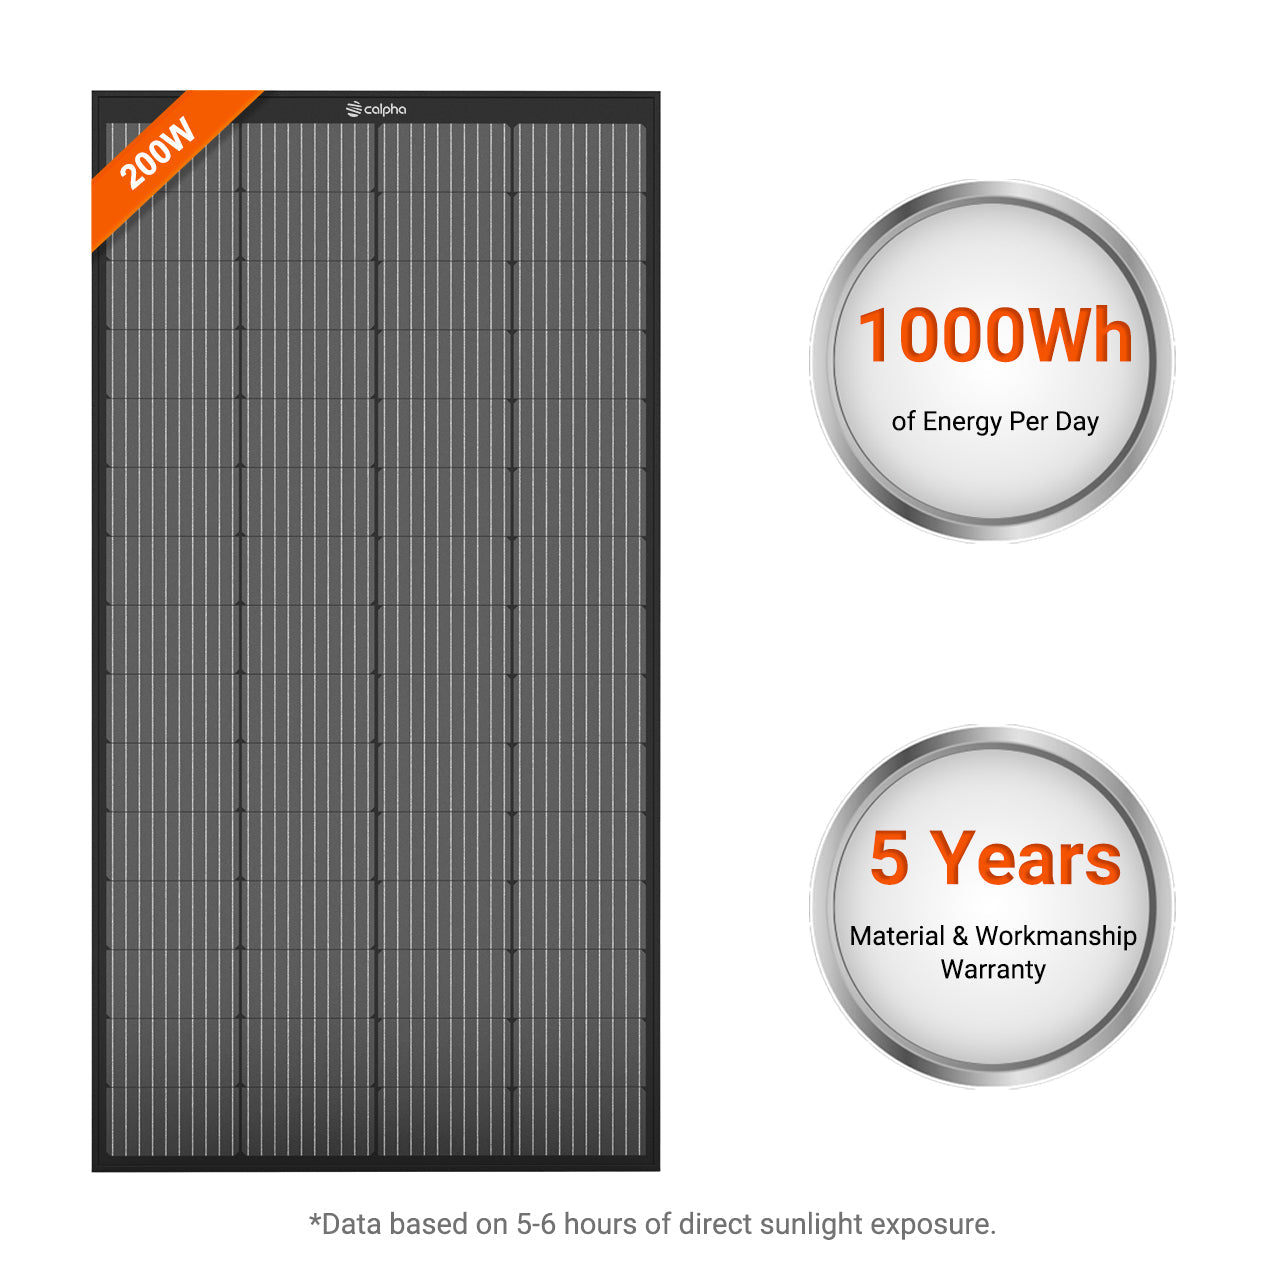 Calpha 200W 1000Wh Rigid Solar Power Panel for home solar energy system - 5 years warranty